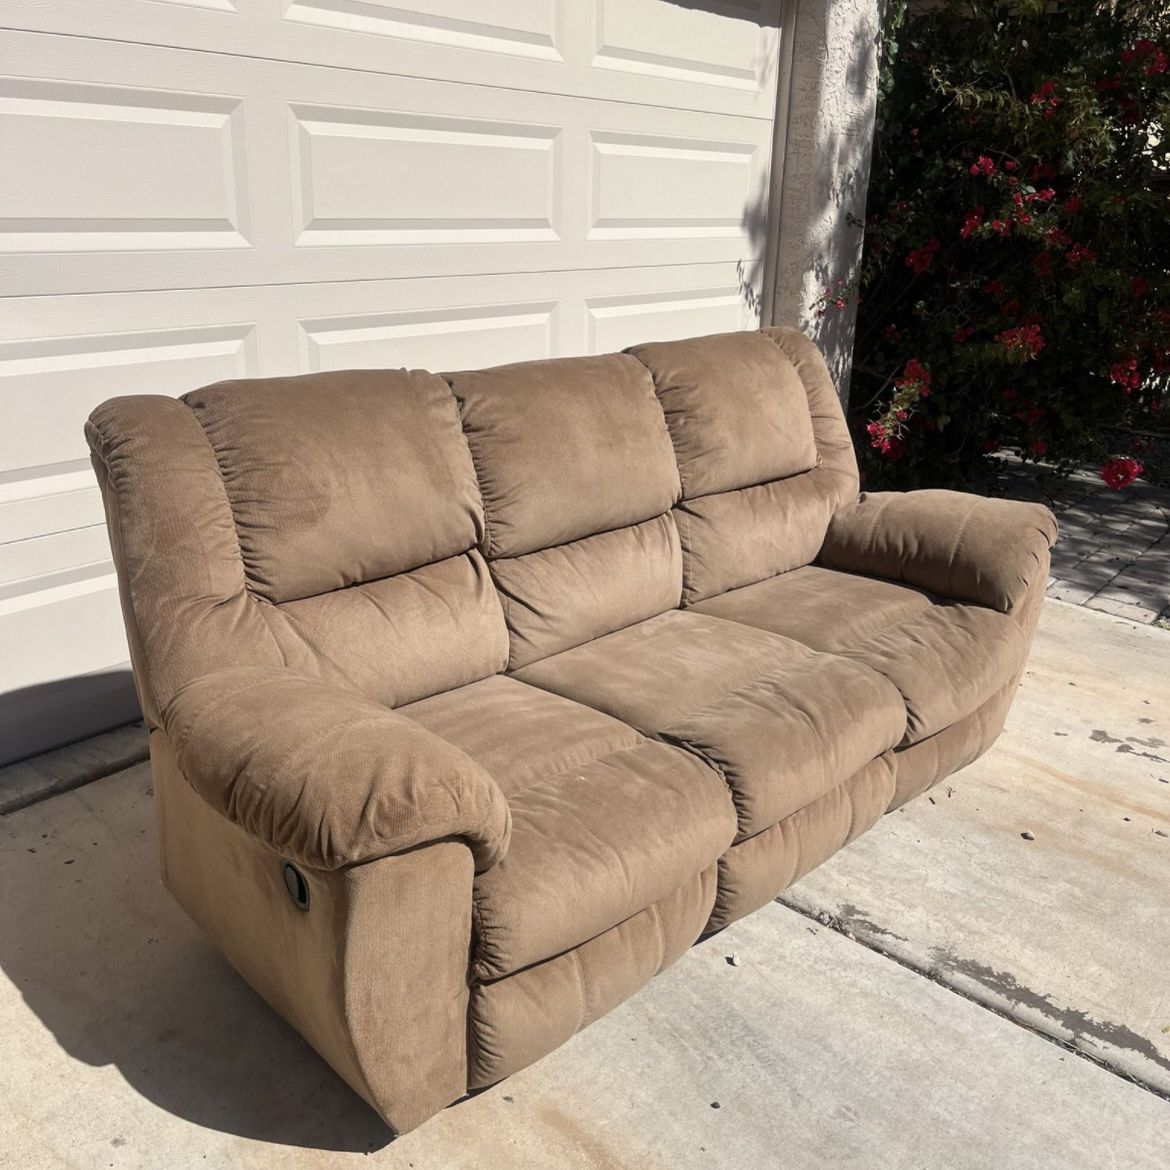 Recliner For Sale! (Delivery Available!) 